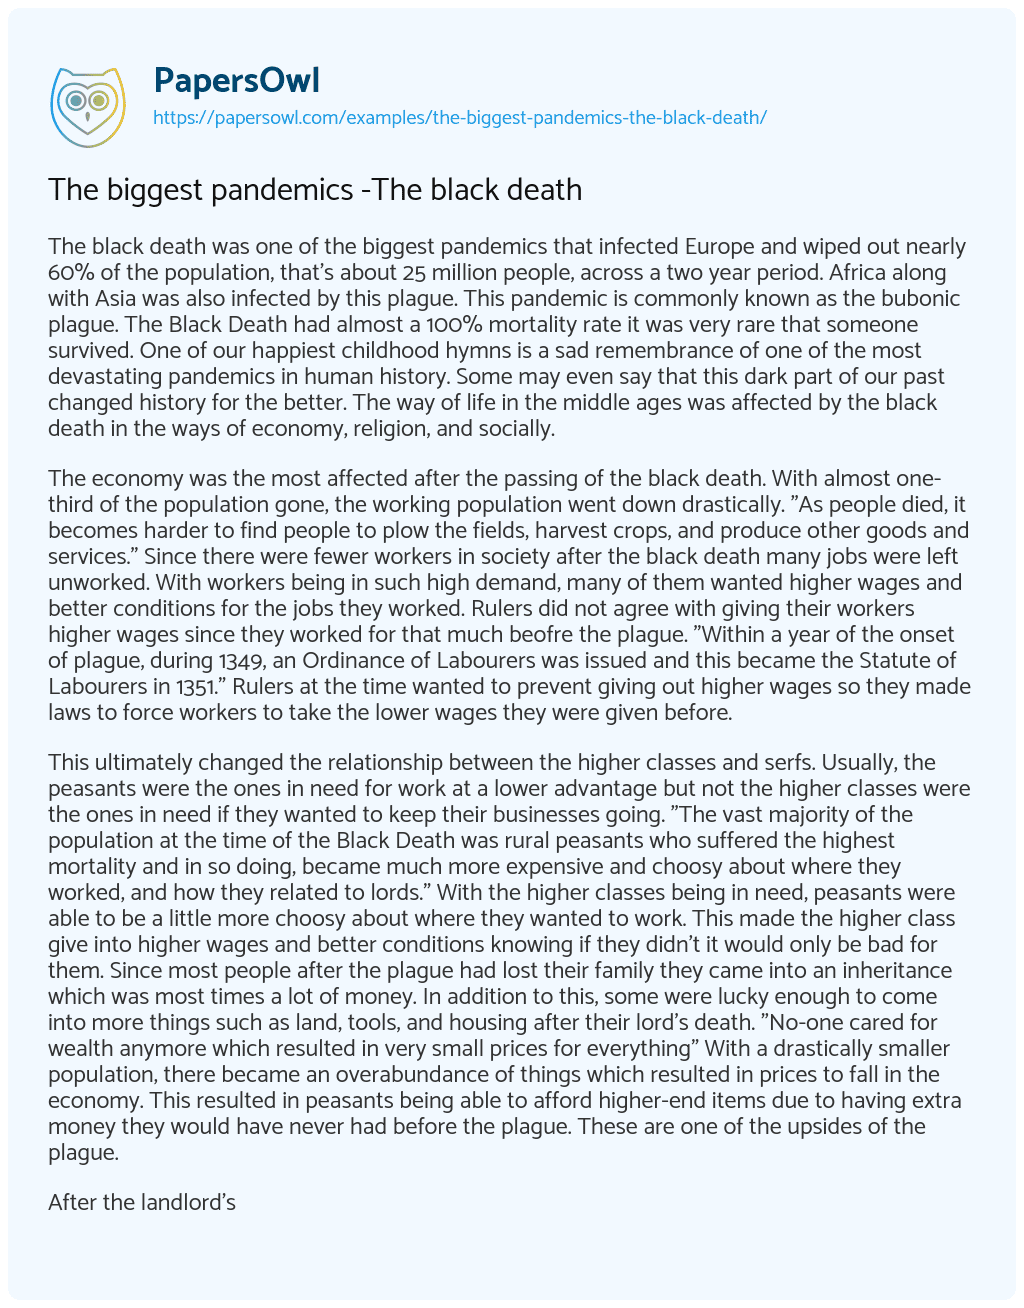 Essay on The Biggest Pandemics -The Black Death